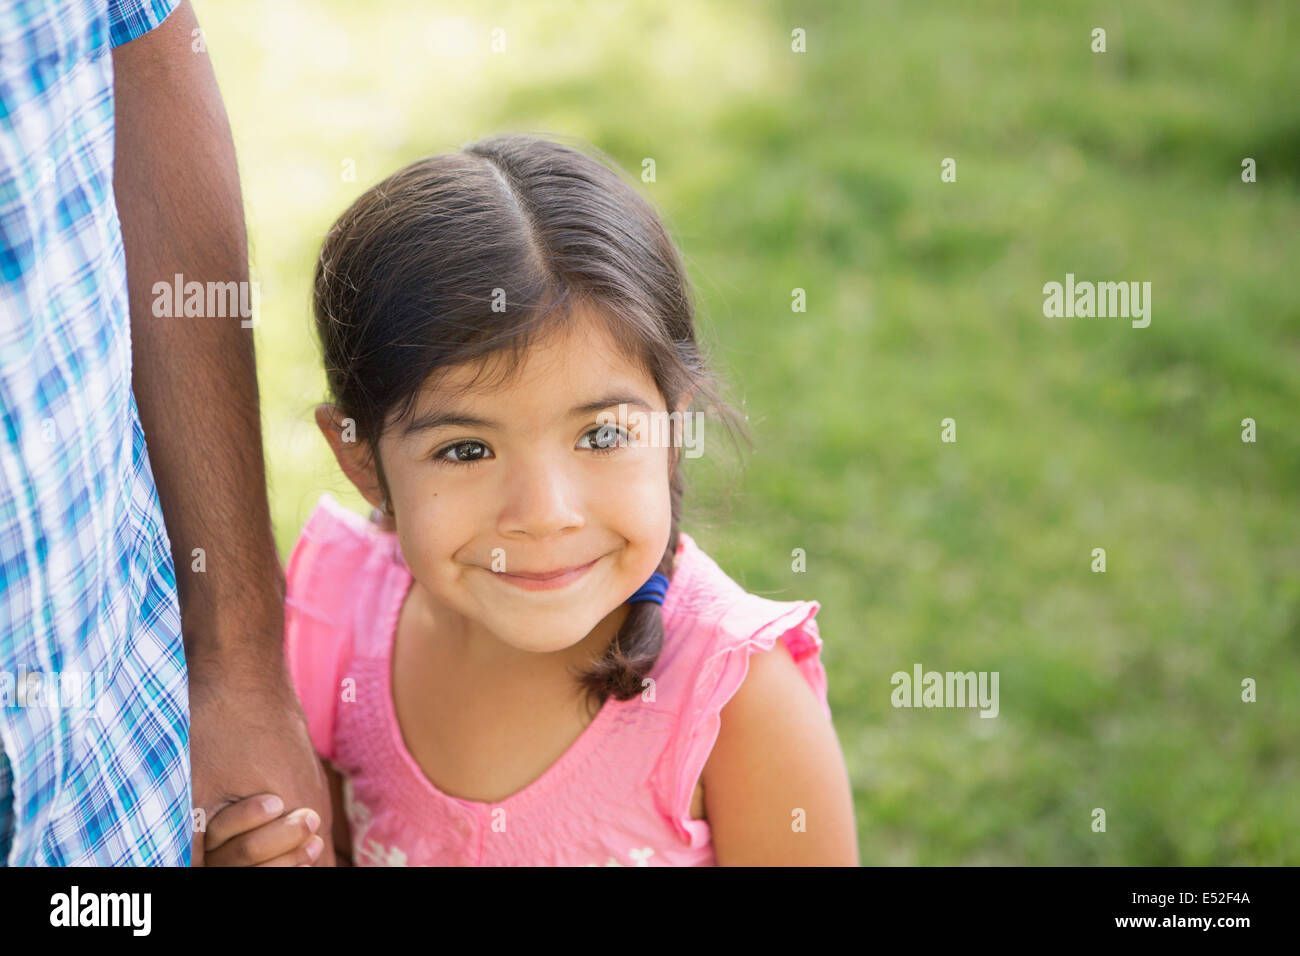 A young child in a pink dress holding her father's hand. Stock Photo